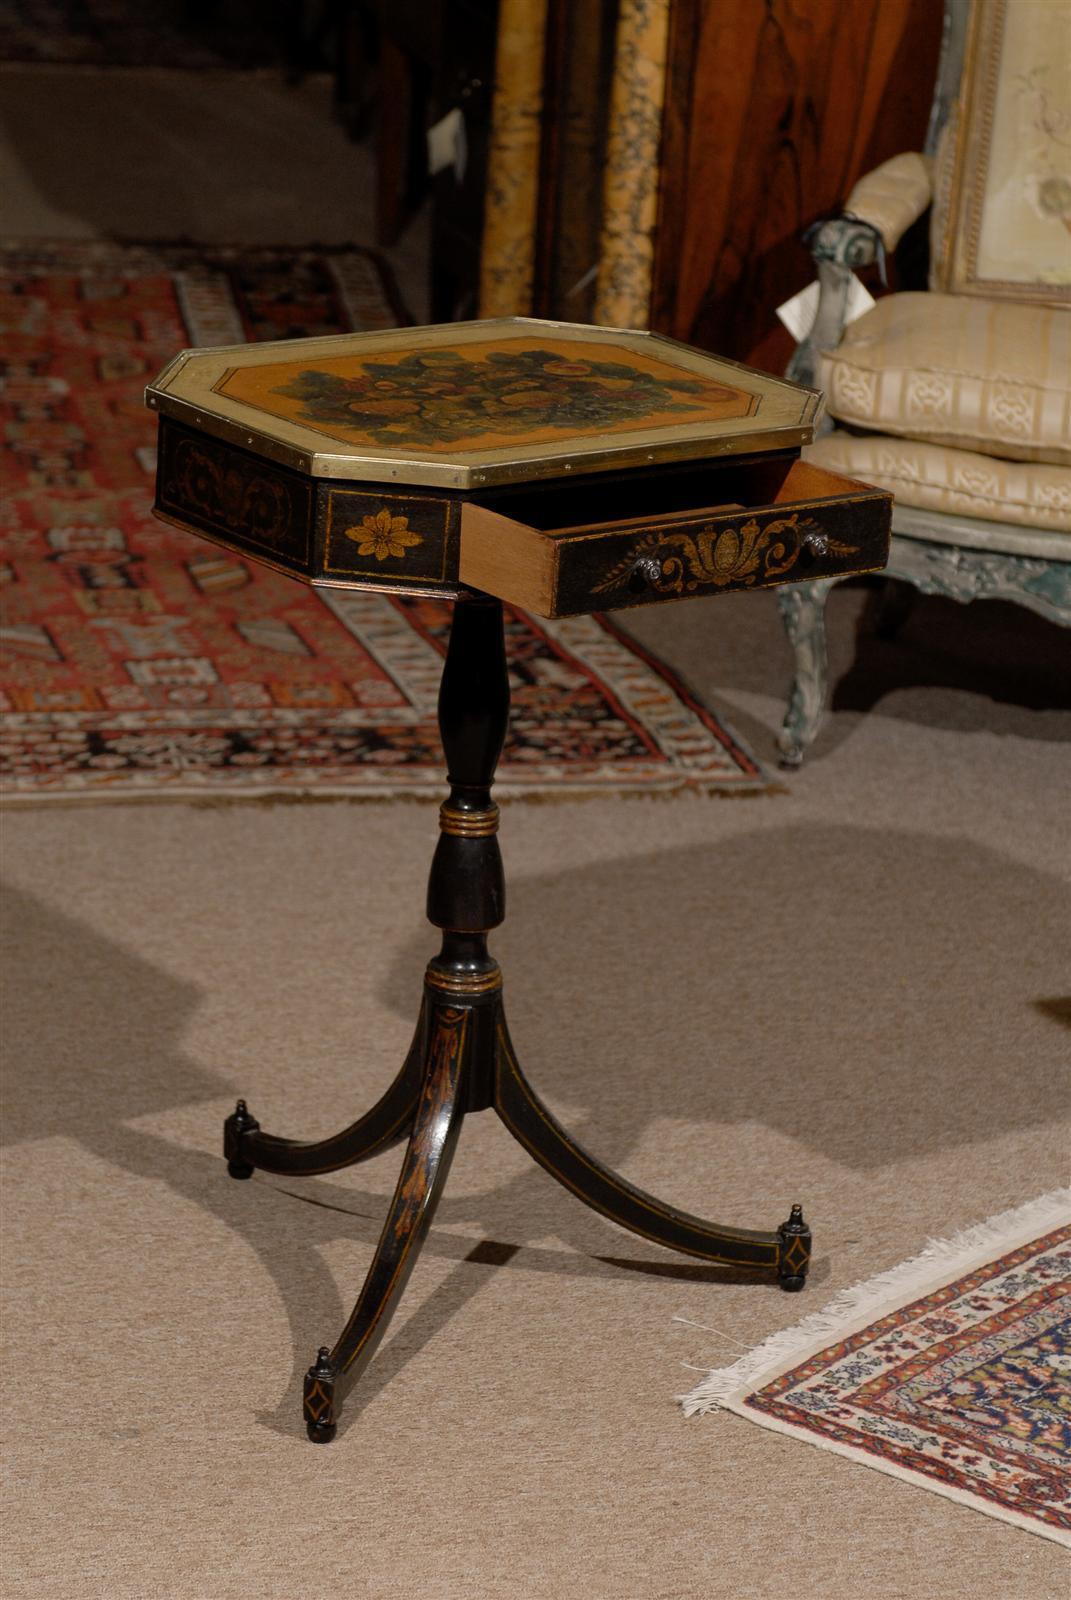 A Regency style side table with decoupage floral decorated top, drawer and tripod base. 

William Word Fine Antiques: Atlanta's source for antique interiors since 1956.